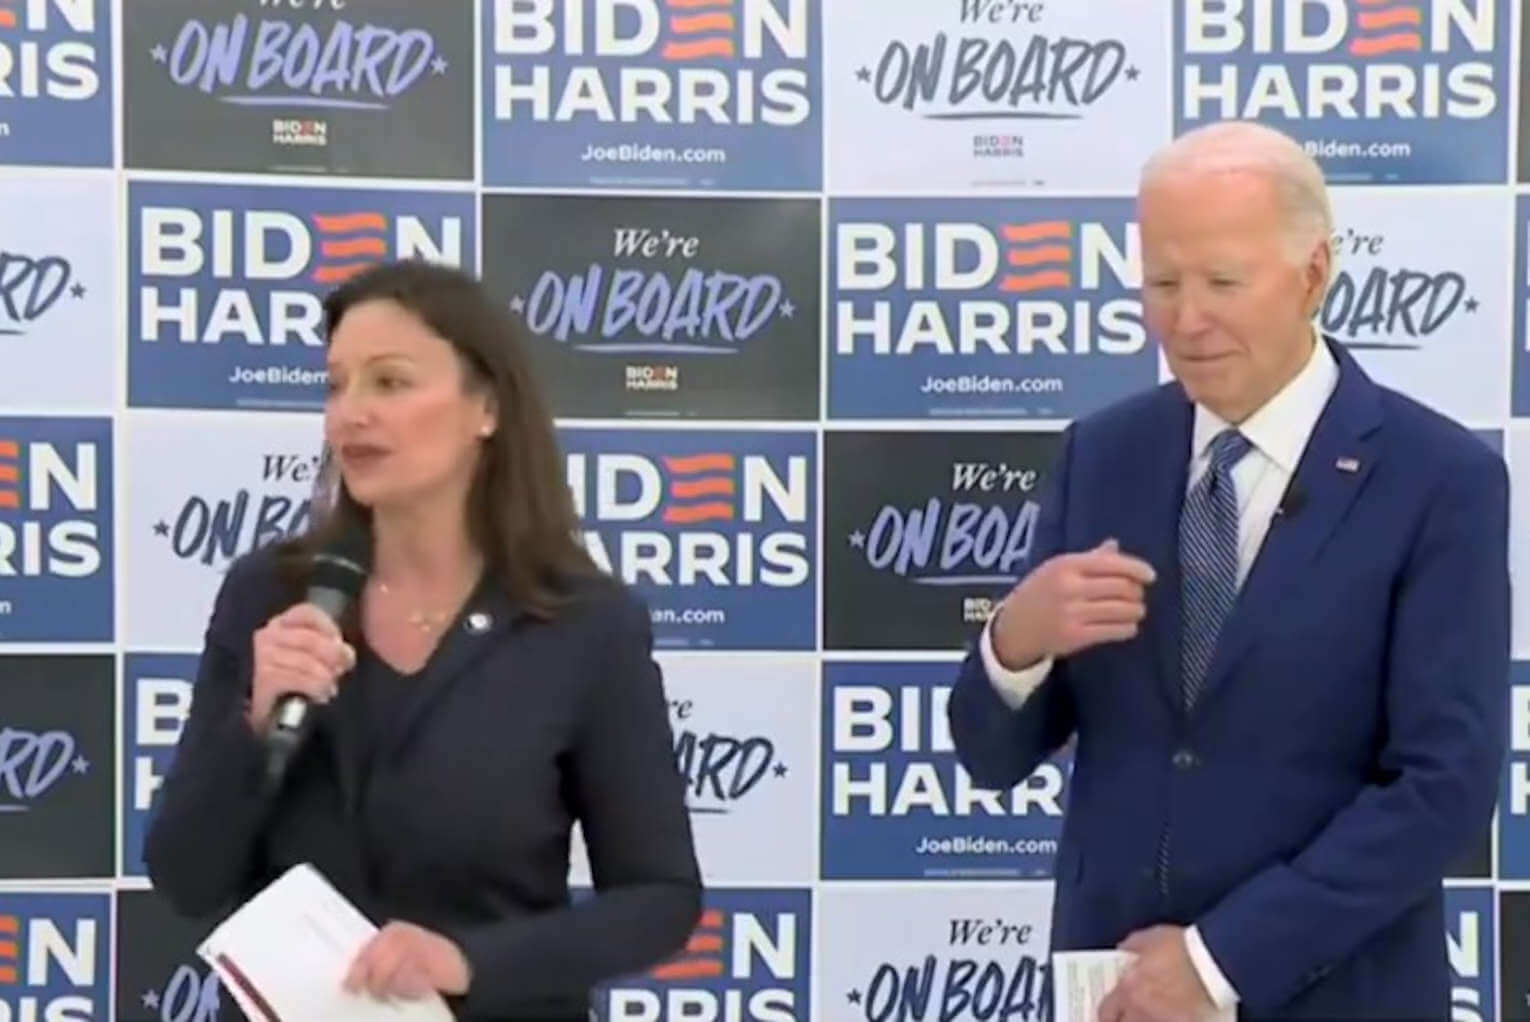 Biden Blesses Abortion at Rally, Outrage Ensues